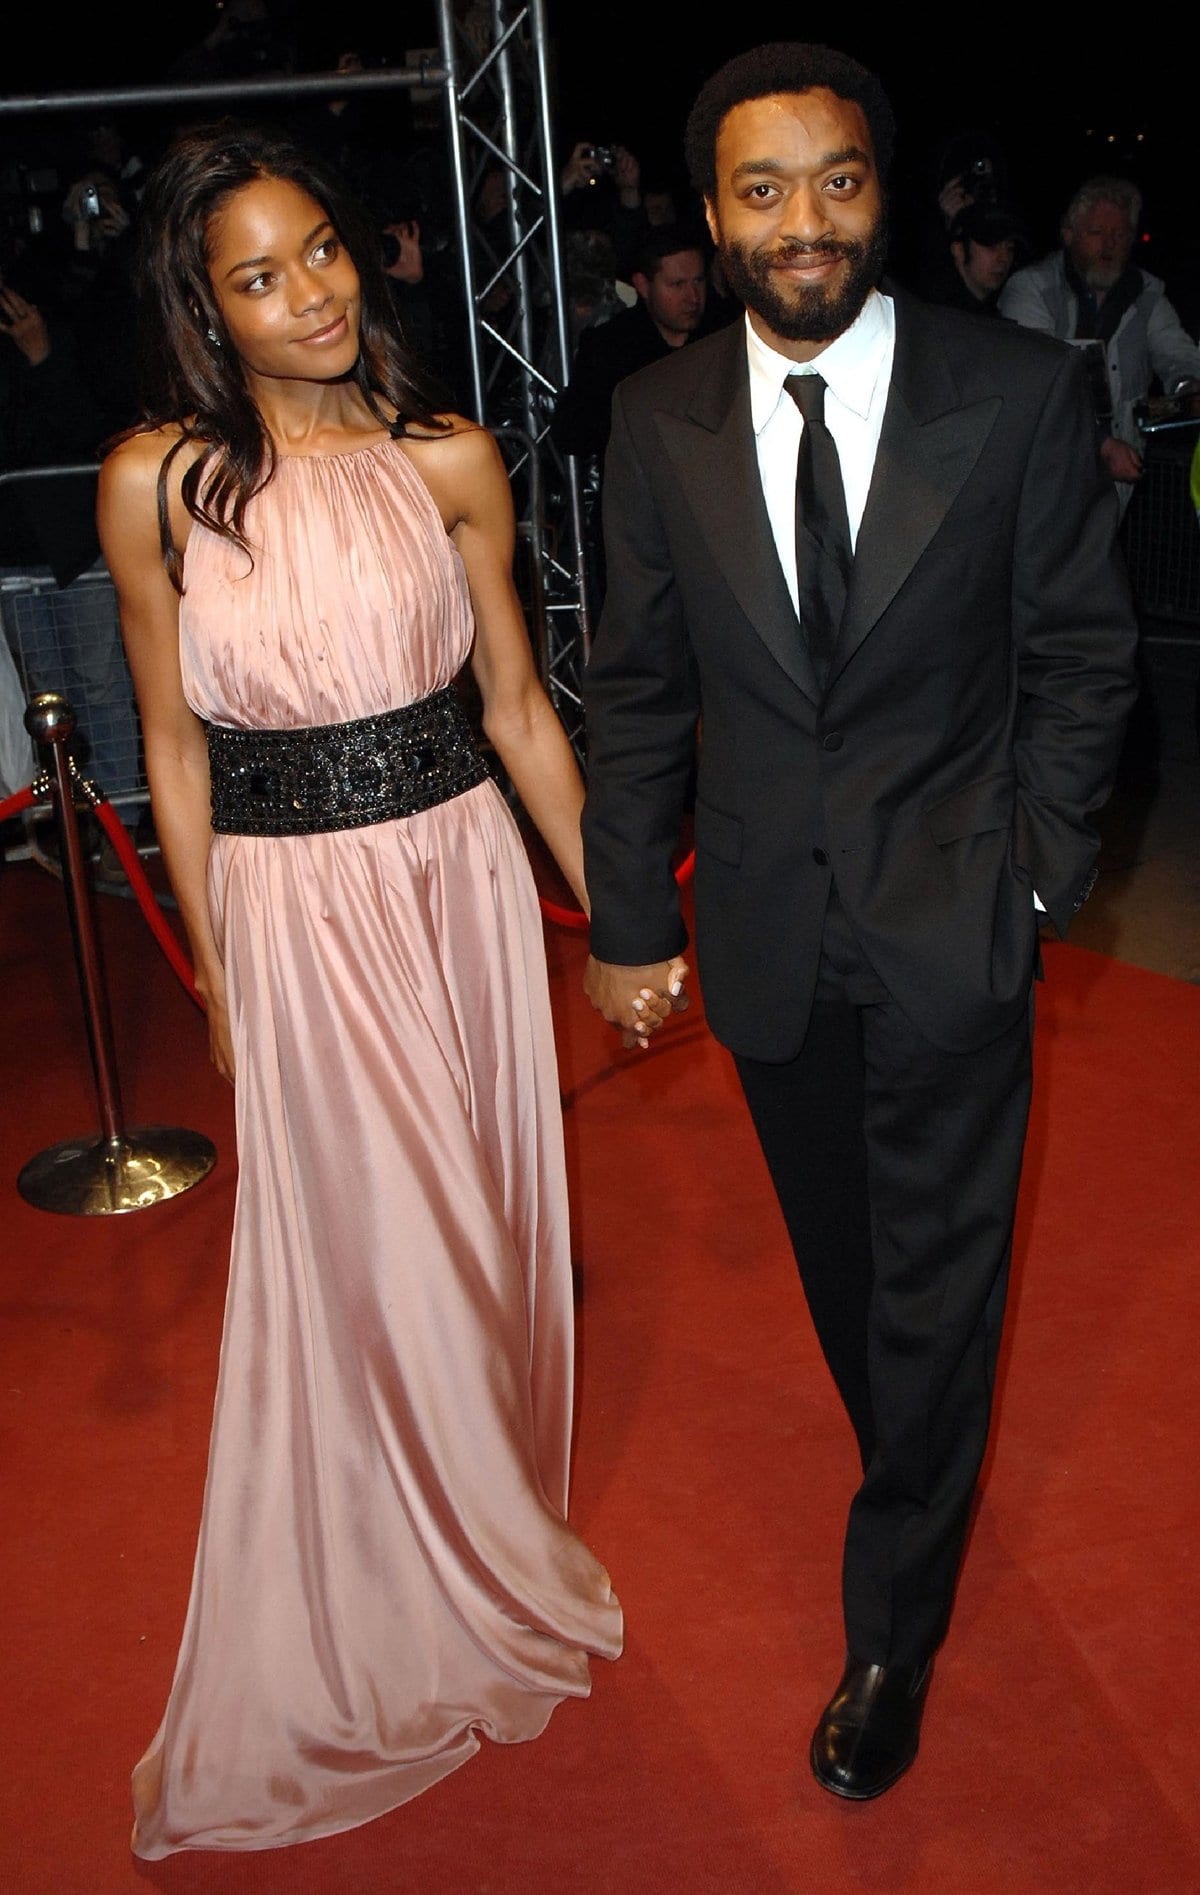 Naomie Harris and Chiwetel Ejiofor dated for seven years and split in 2007